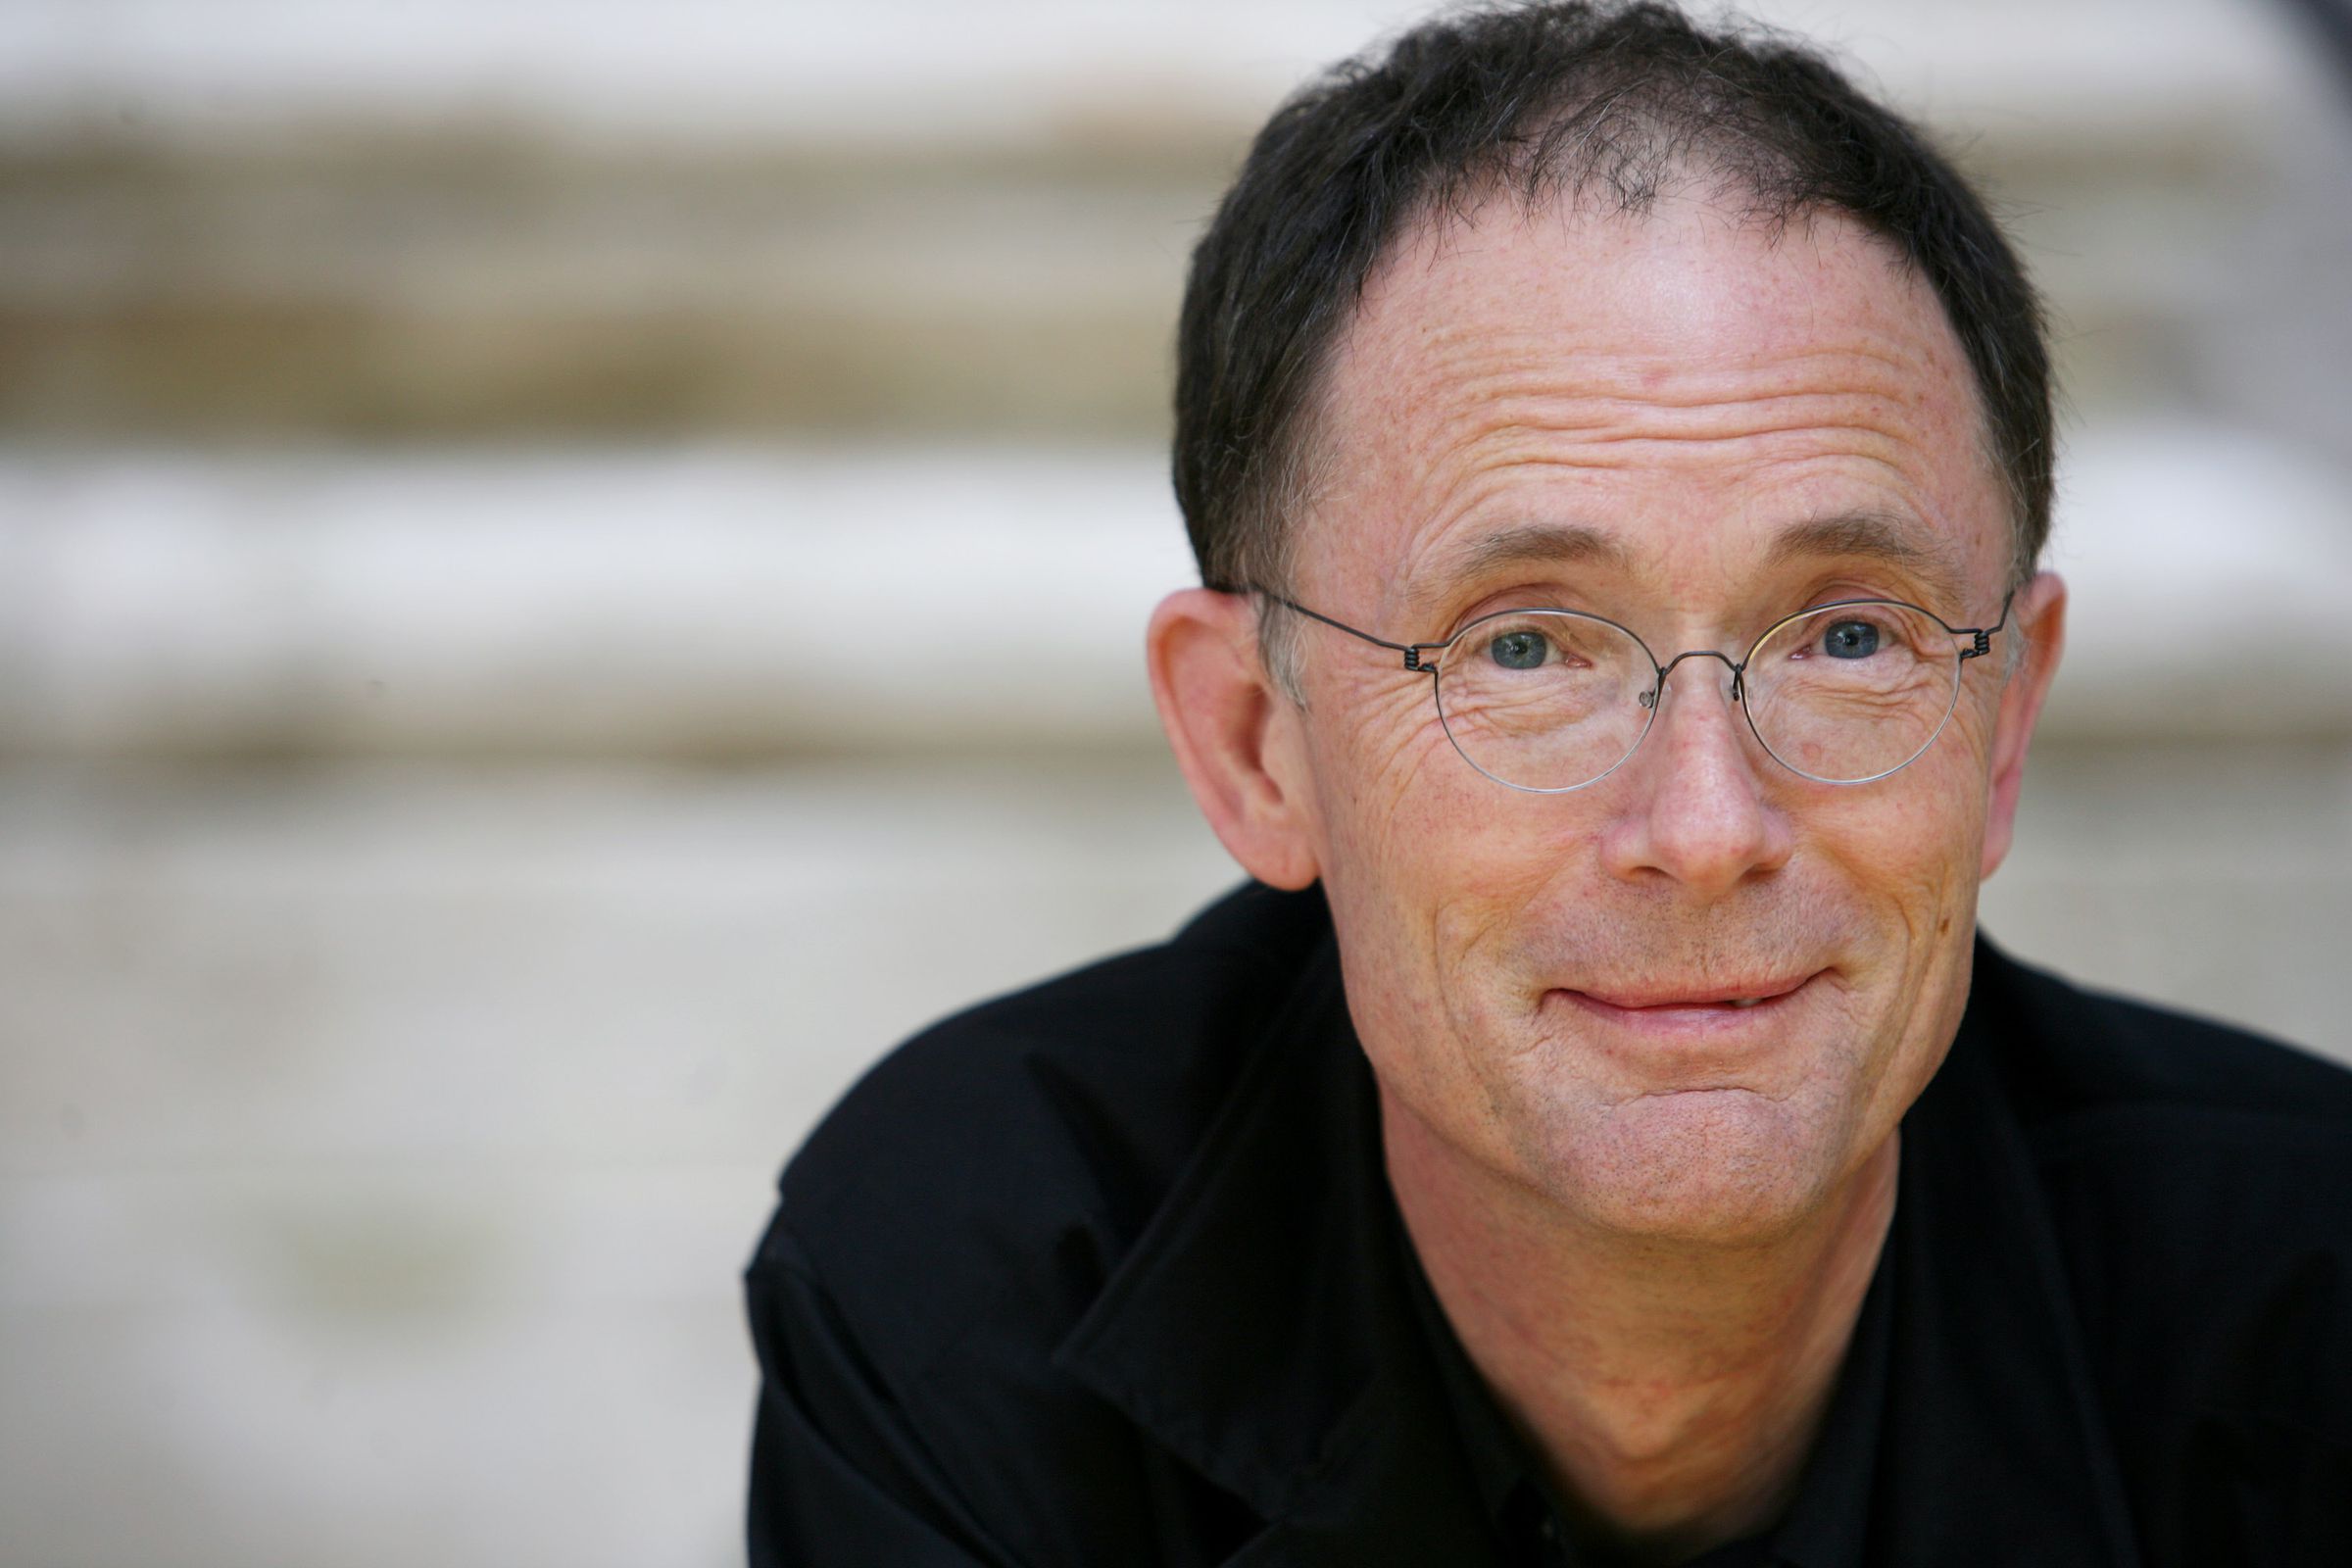 U.S. Author William Gibson attends the 7th editition of the Festival of Literature at Literature House on May 26, 2007 in Rome, Italy.